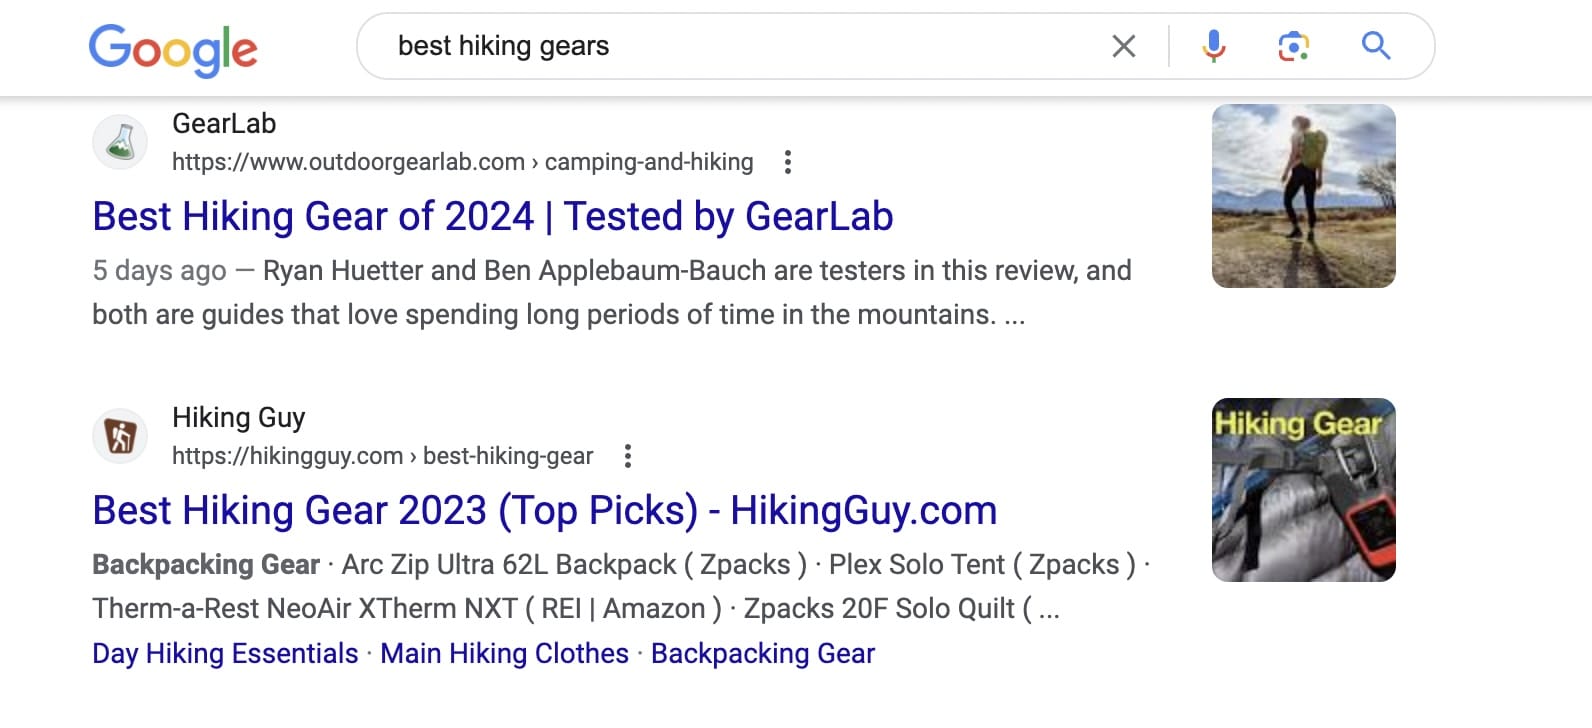 Best hiking gears search results